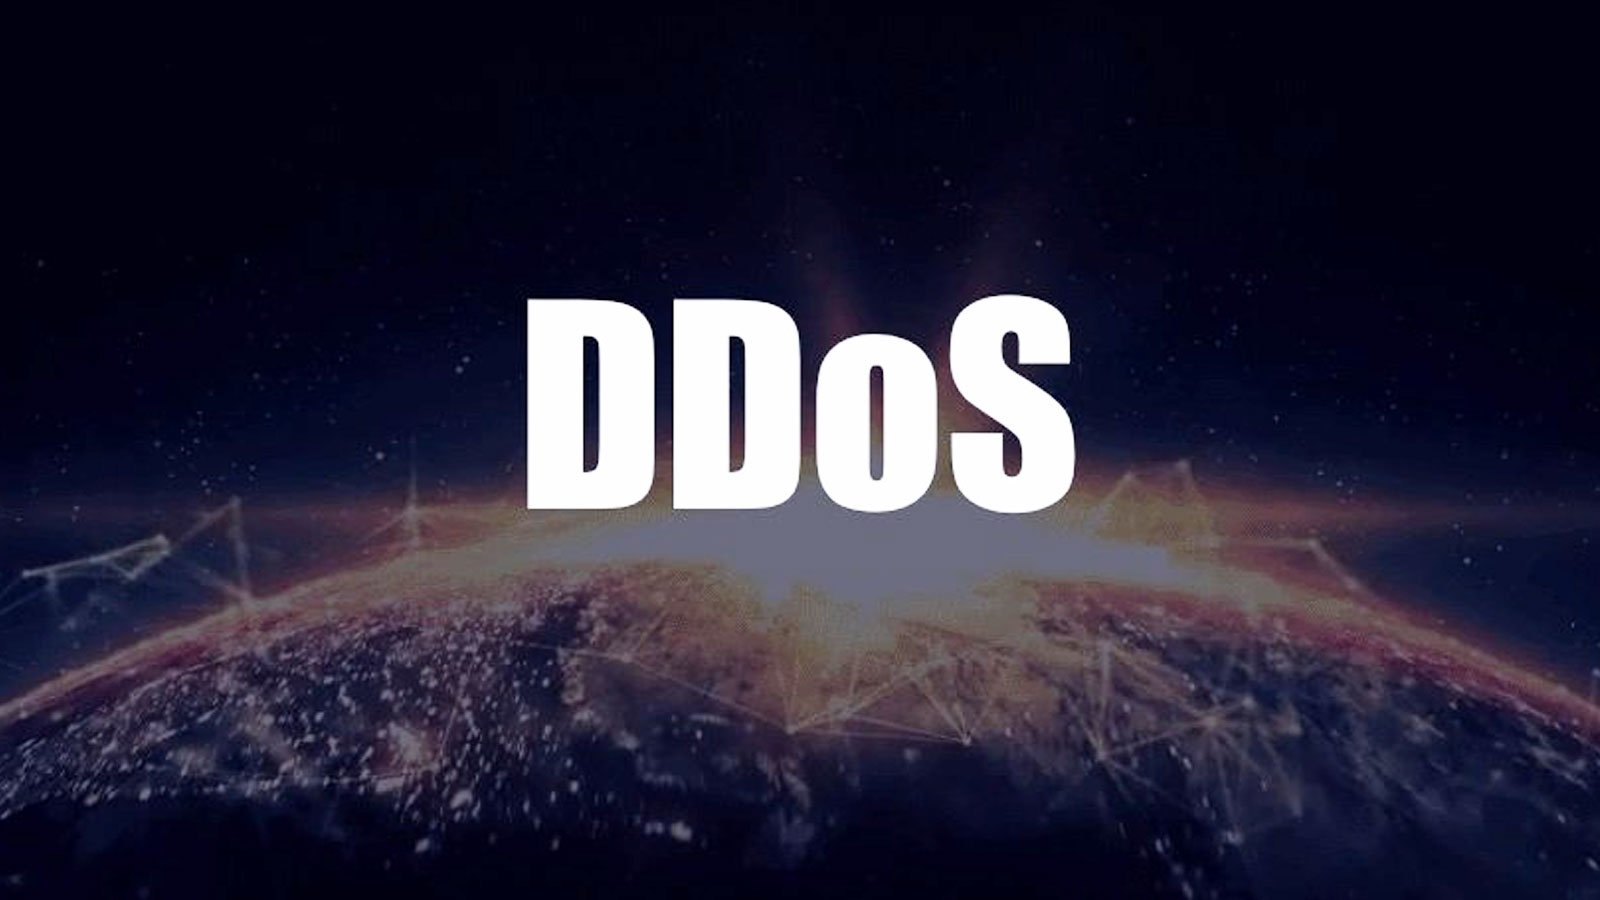 Pro-Ukraine hackers use Docker images to DDoS Russian sites